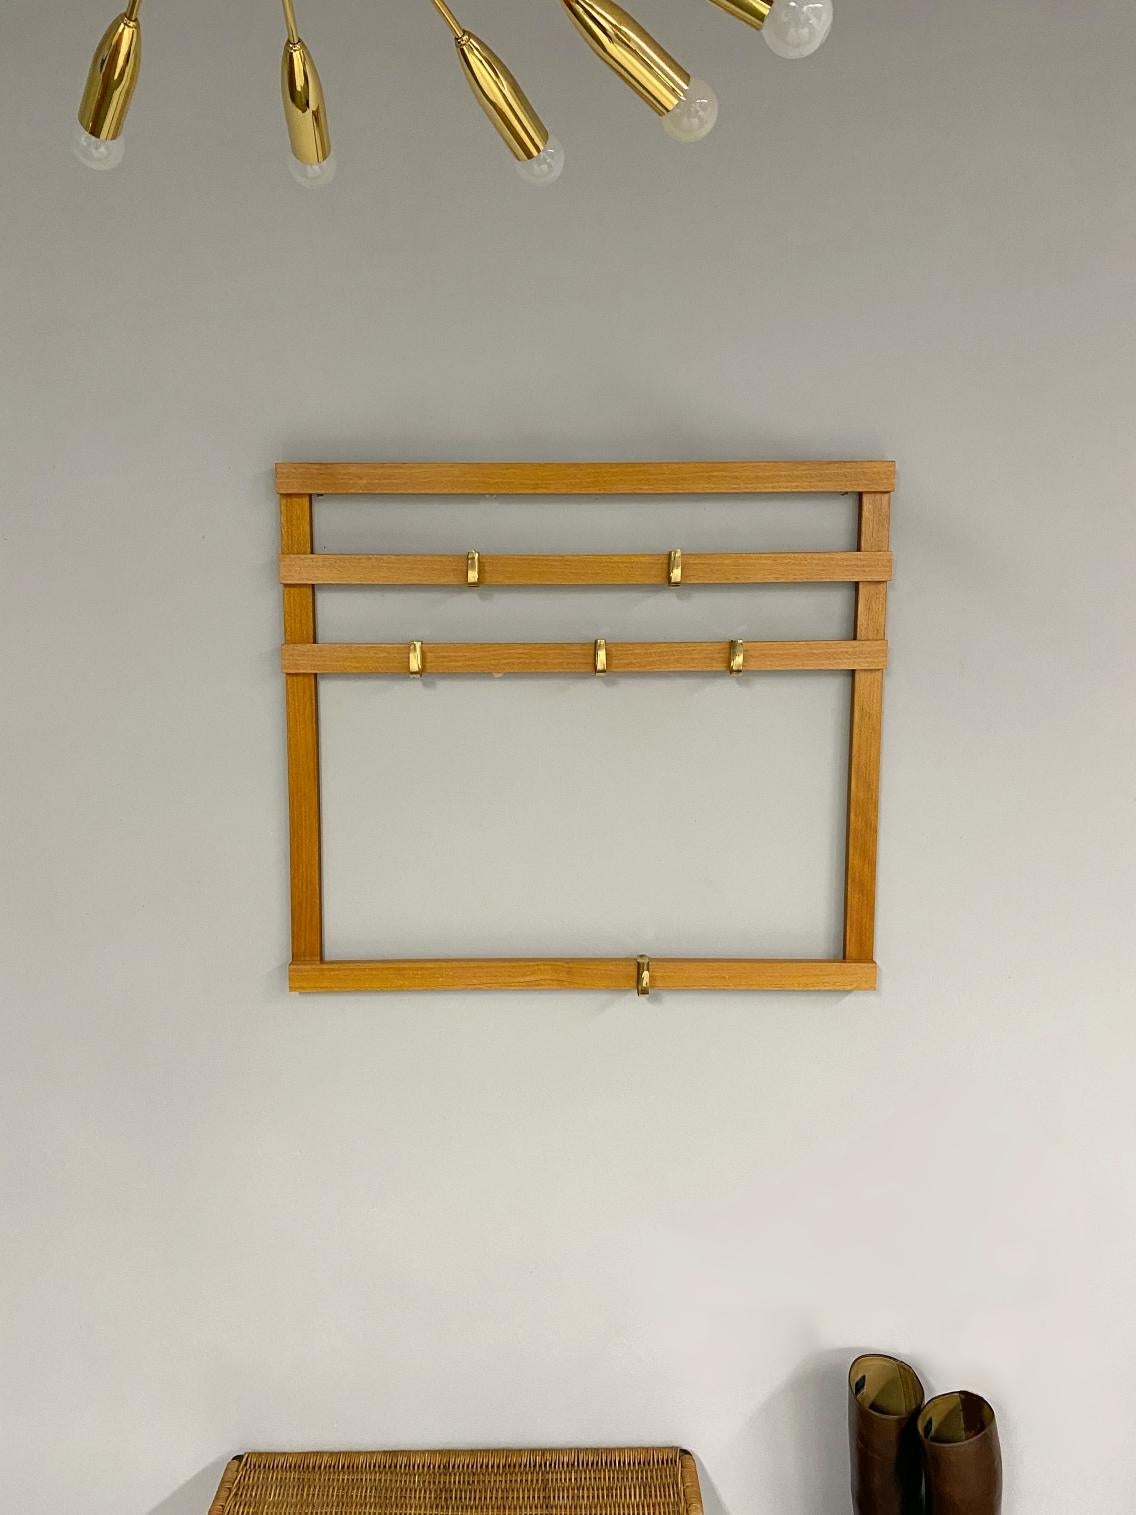 Austrian Mid-Century Modern coatrack made of solid beechwood with six polished solid brass hooks designed by Carl Auböck and handmade by Werkstätten Auböck. 

Lit.: Carl Auböck the Workshop by Clemens Kois.

We ship with DHL & DHL-Express 




 